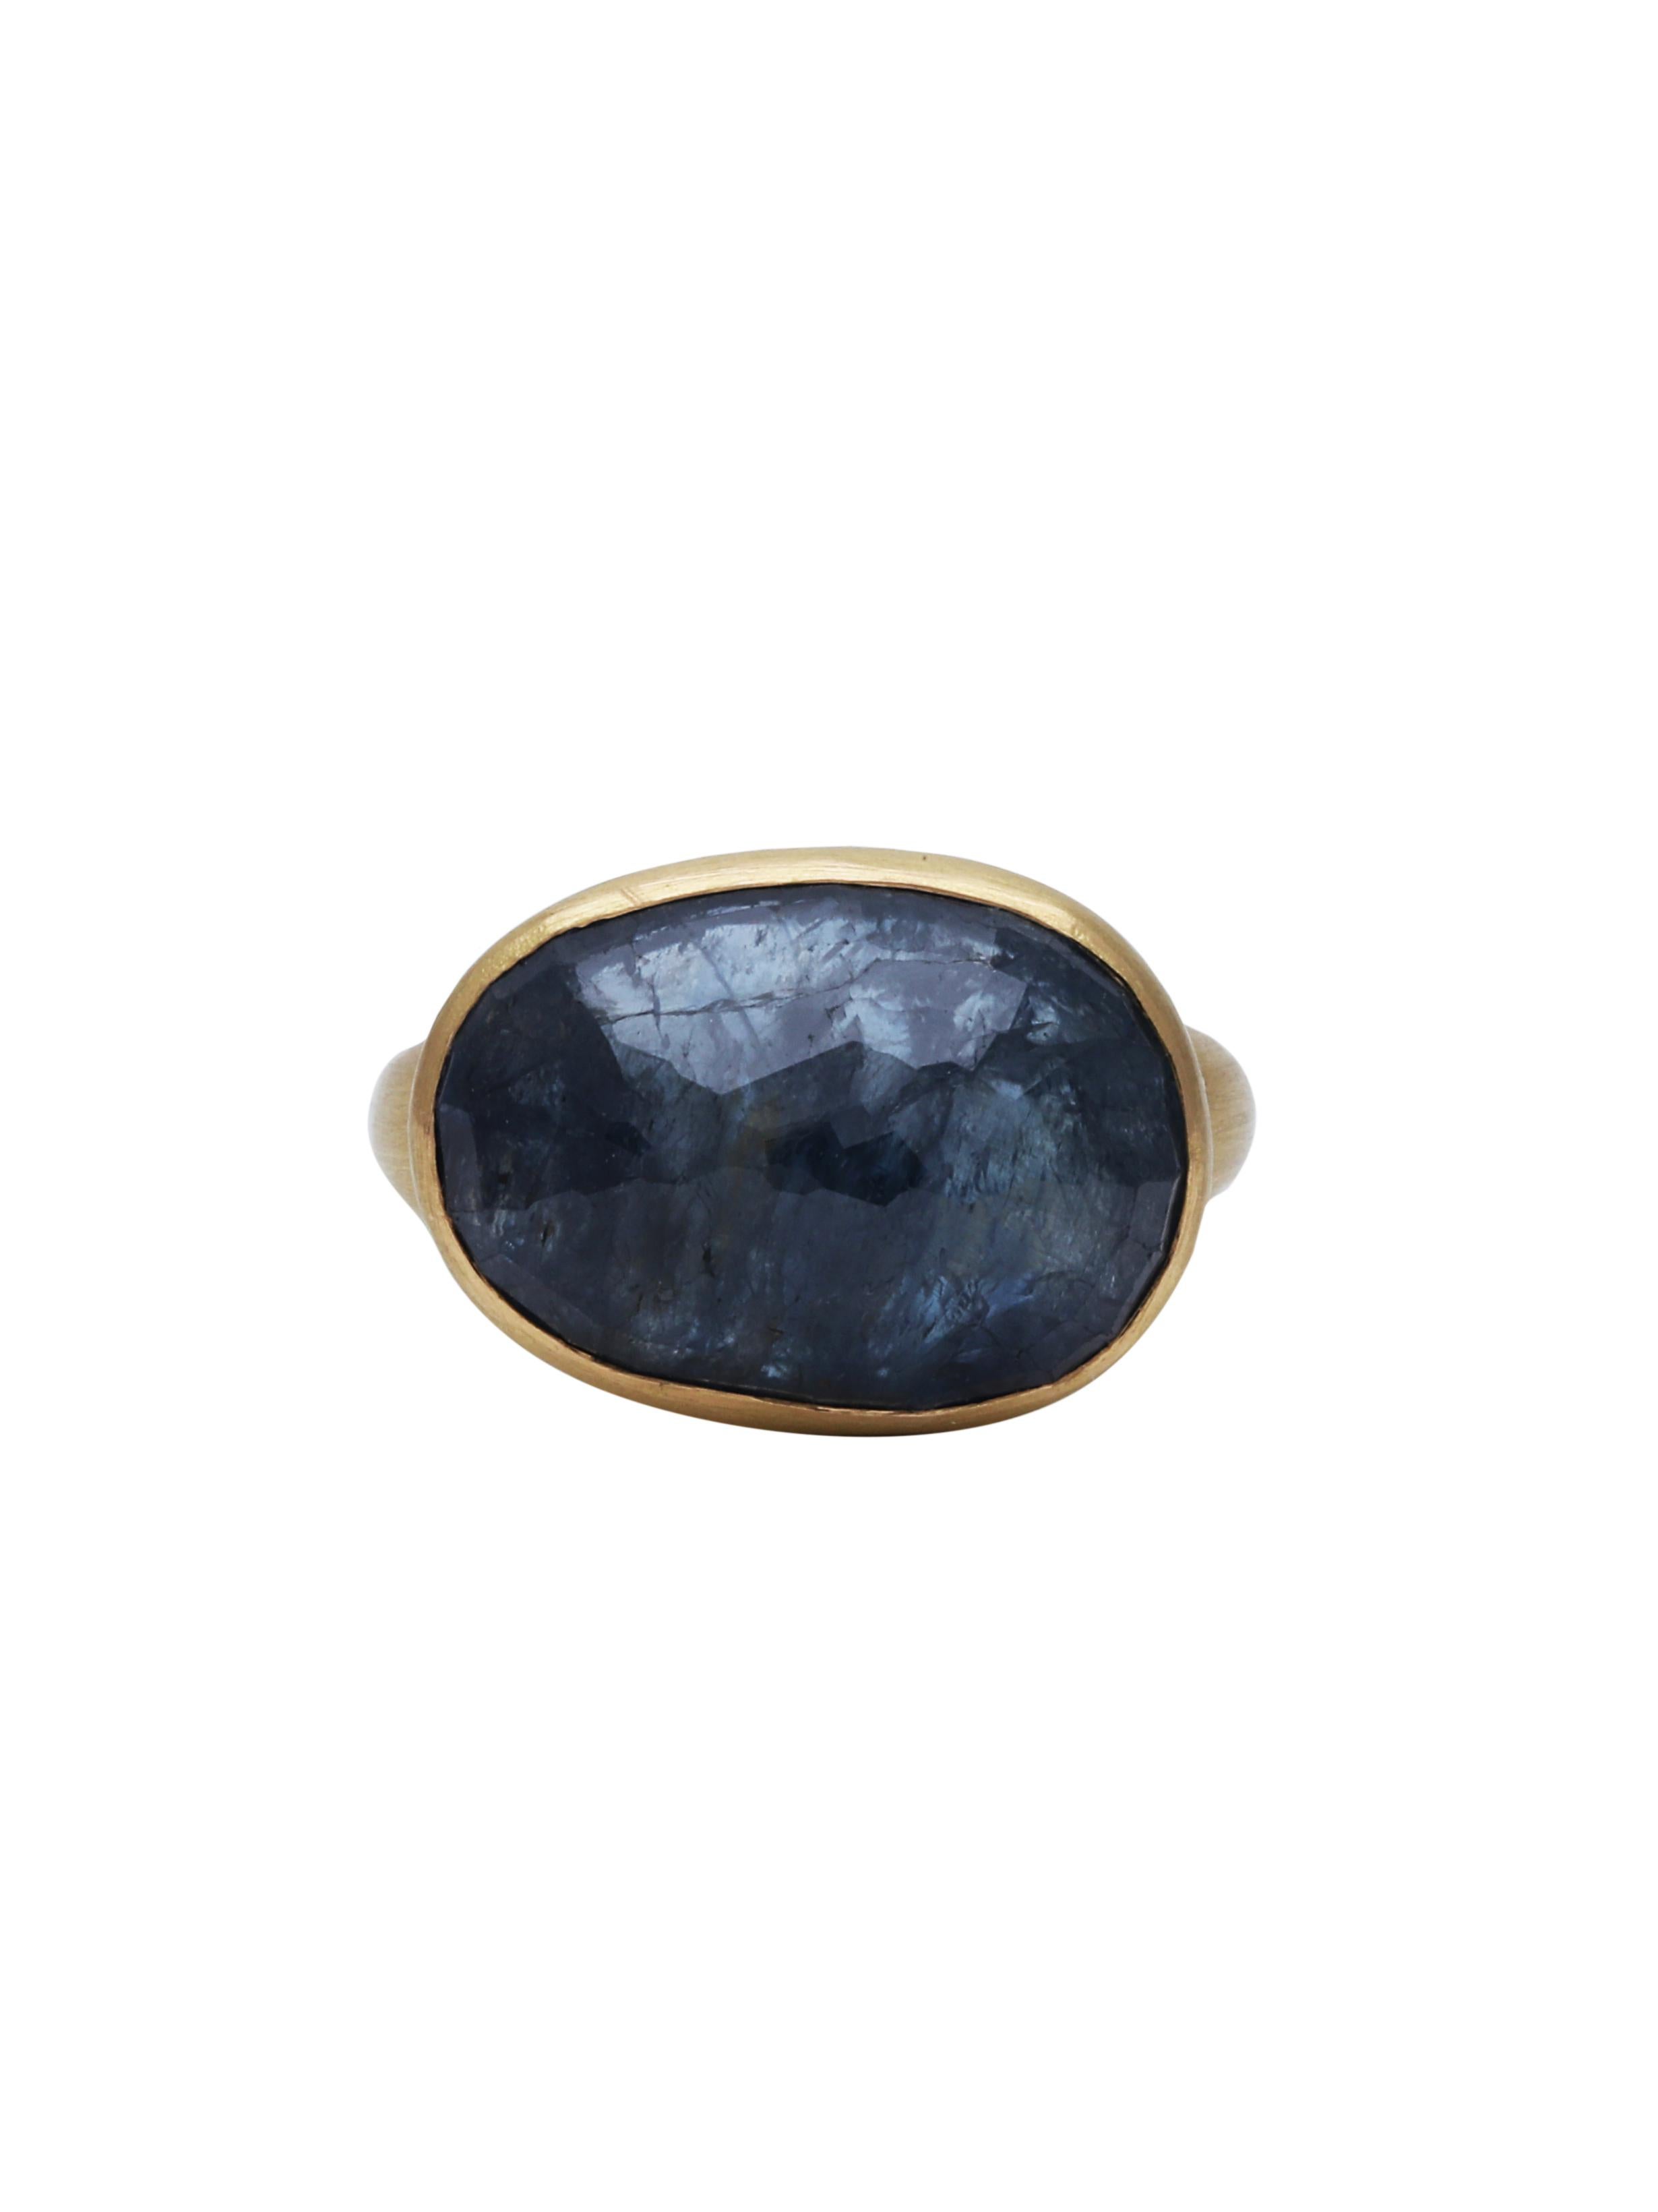 A beautiful ring with a 18.67 carats Natural Sapphire set in 22K Matte finish Gold.
A simple and elegant ring.

Ring Size: US 7.5